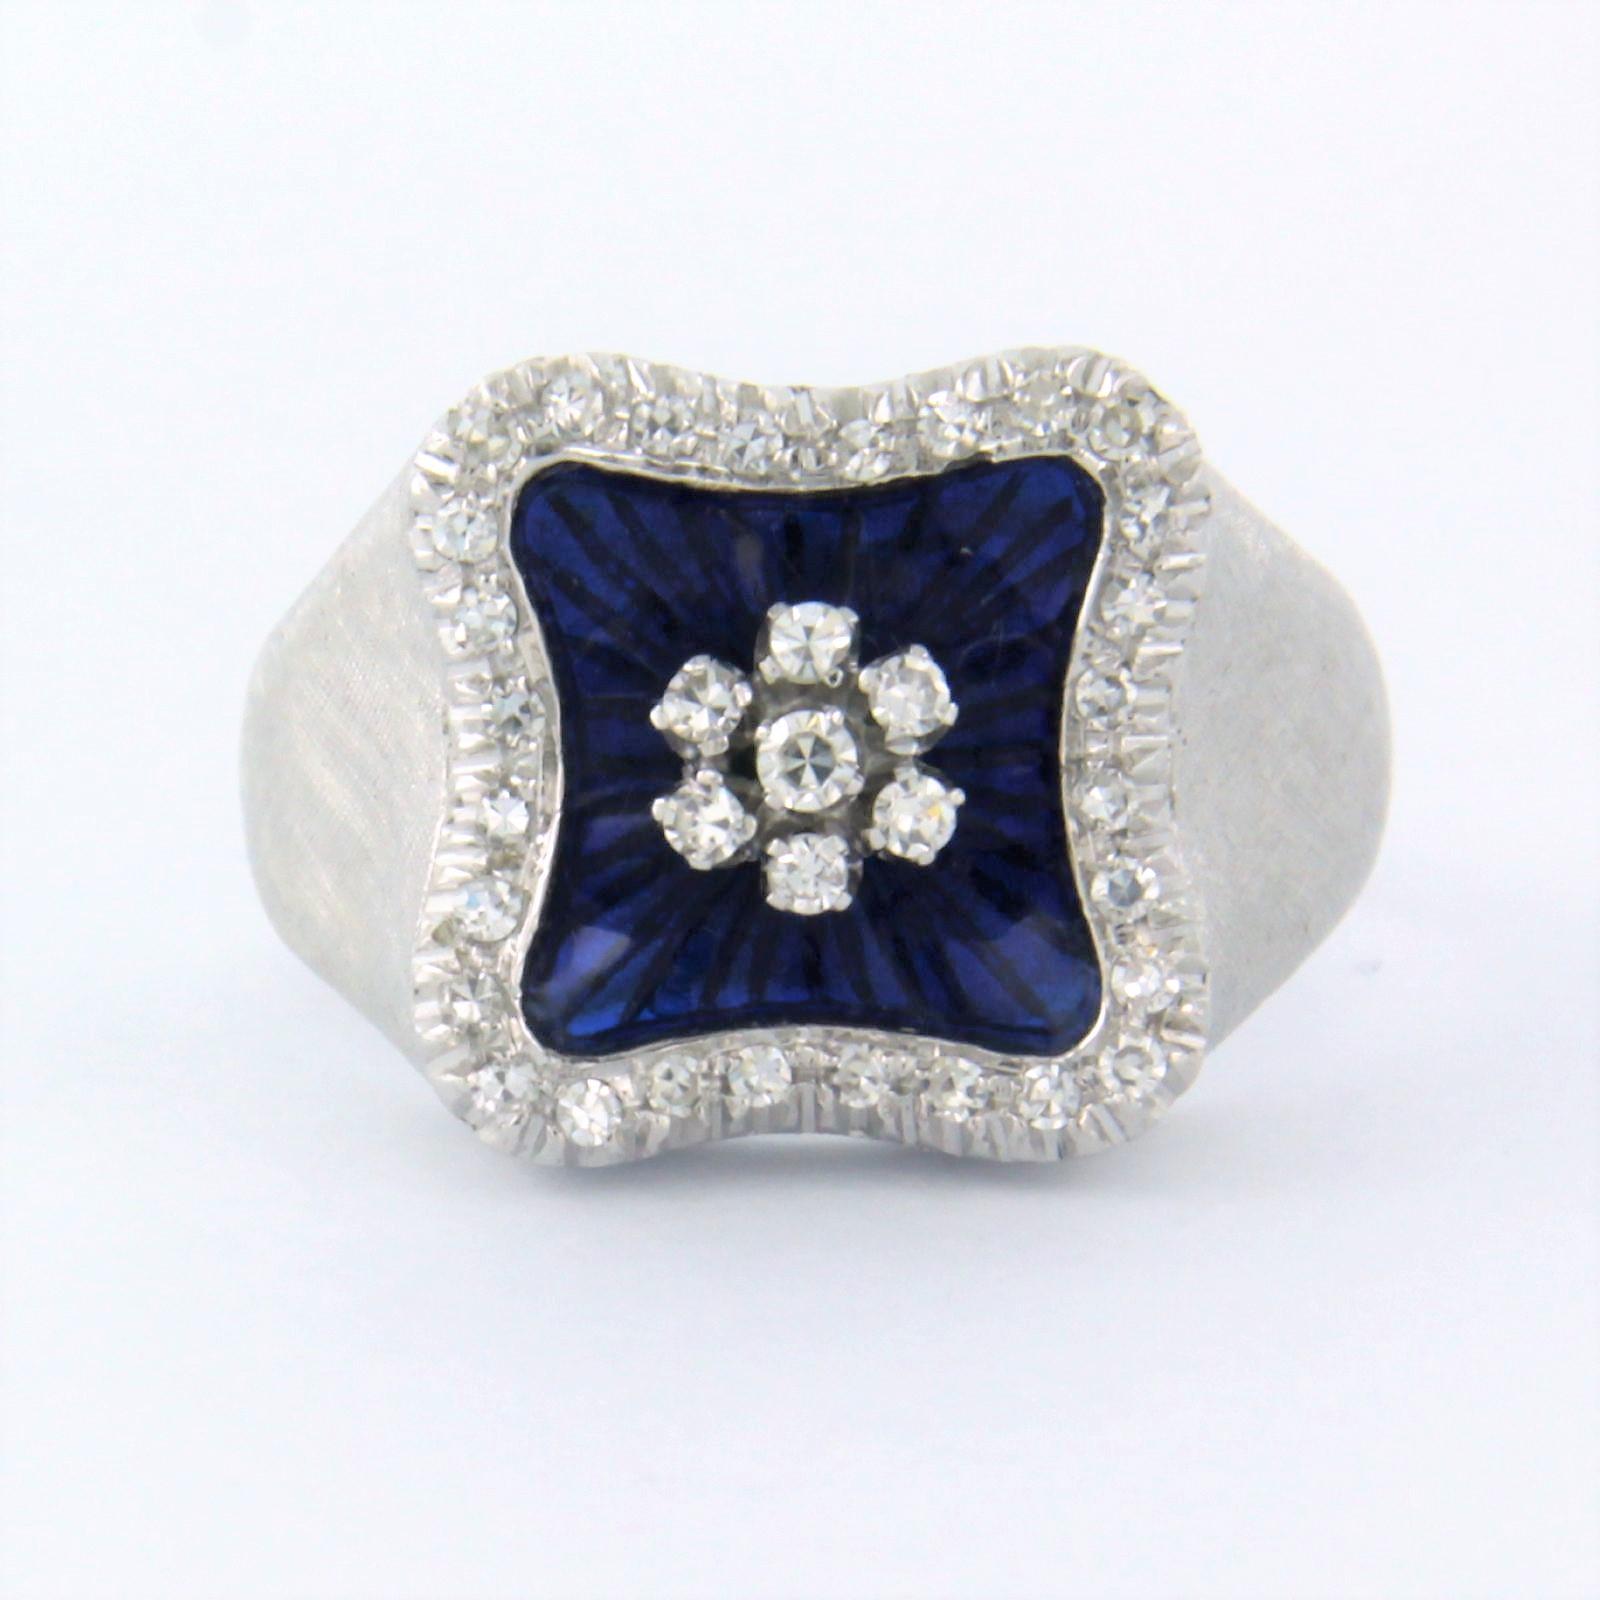 18k white gold ring decorated with blue enamel and set with single cut diamonds. 0.45ct – F/G – VS/SI - ring size U.S. 7.5 – EU. 17.75(56)

detailed description:

The top of the ring is 1.3 cm wide by 5.8 mm high

Ring size US 7.5 – EU. 17.75(56),